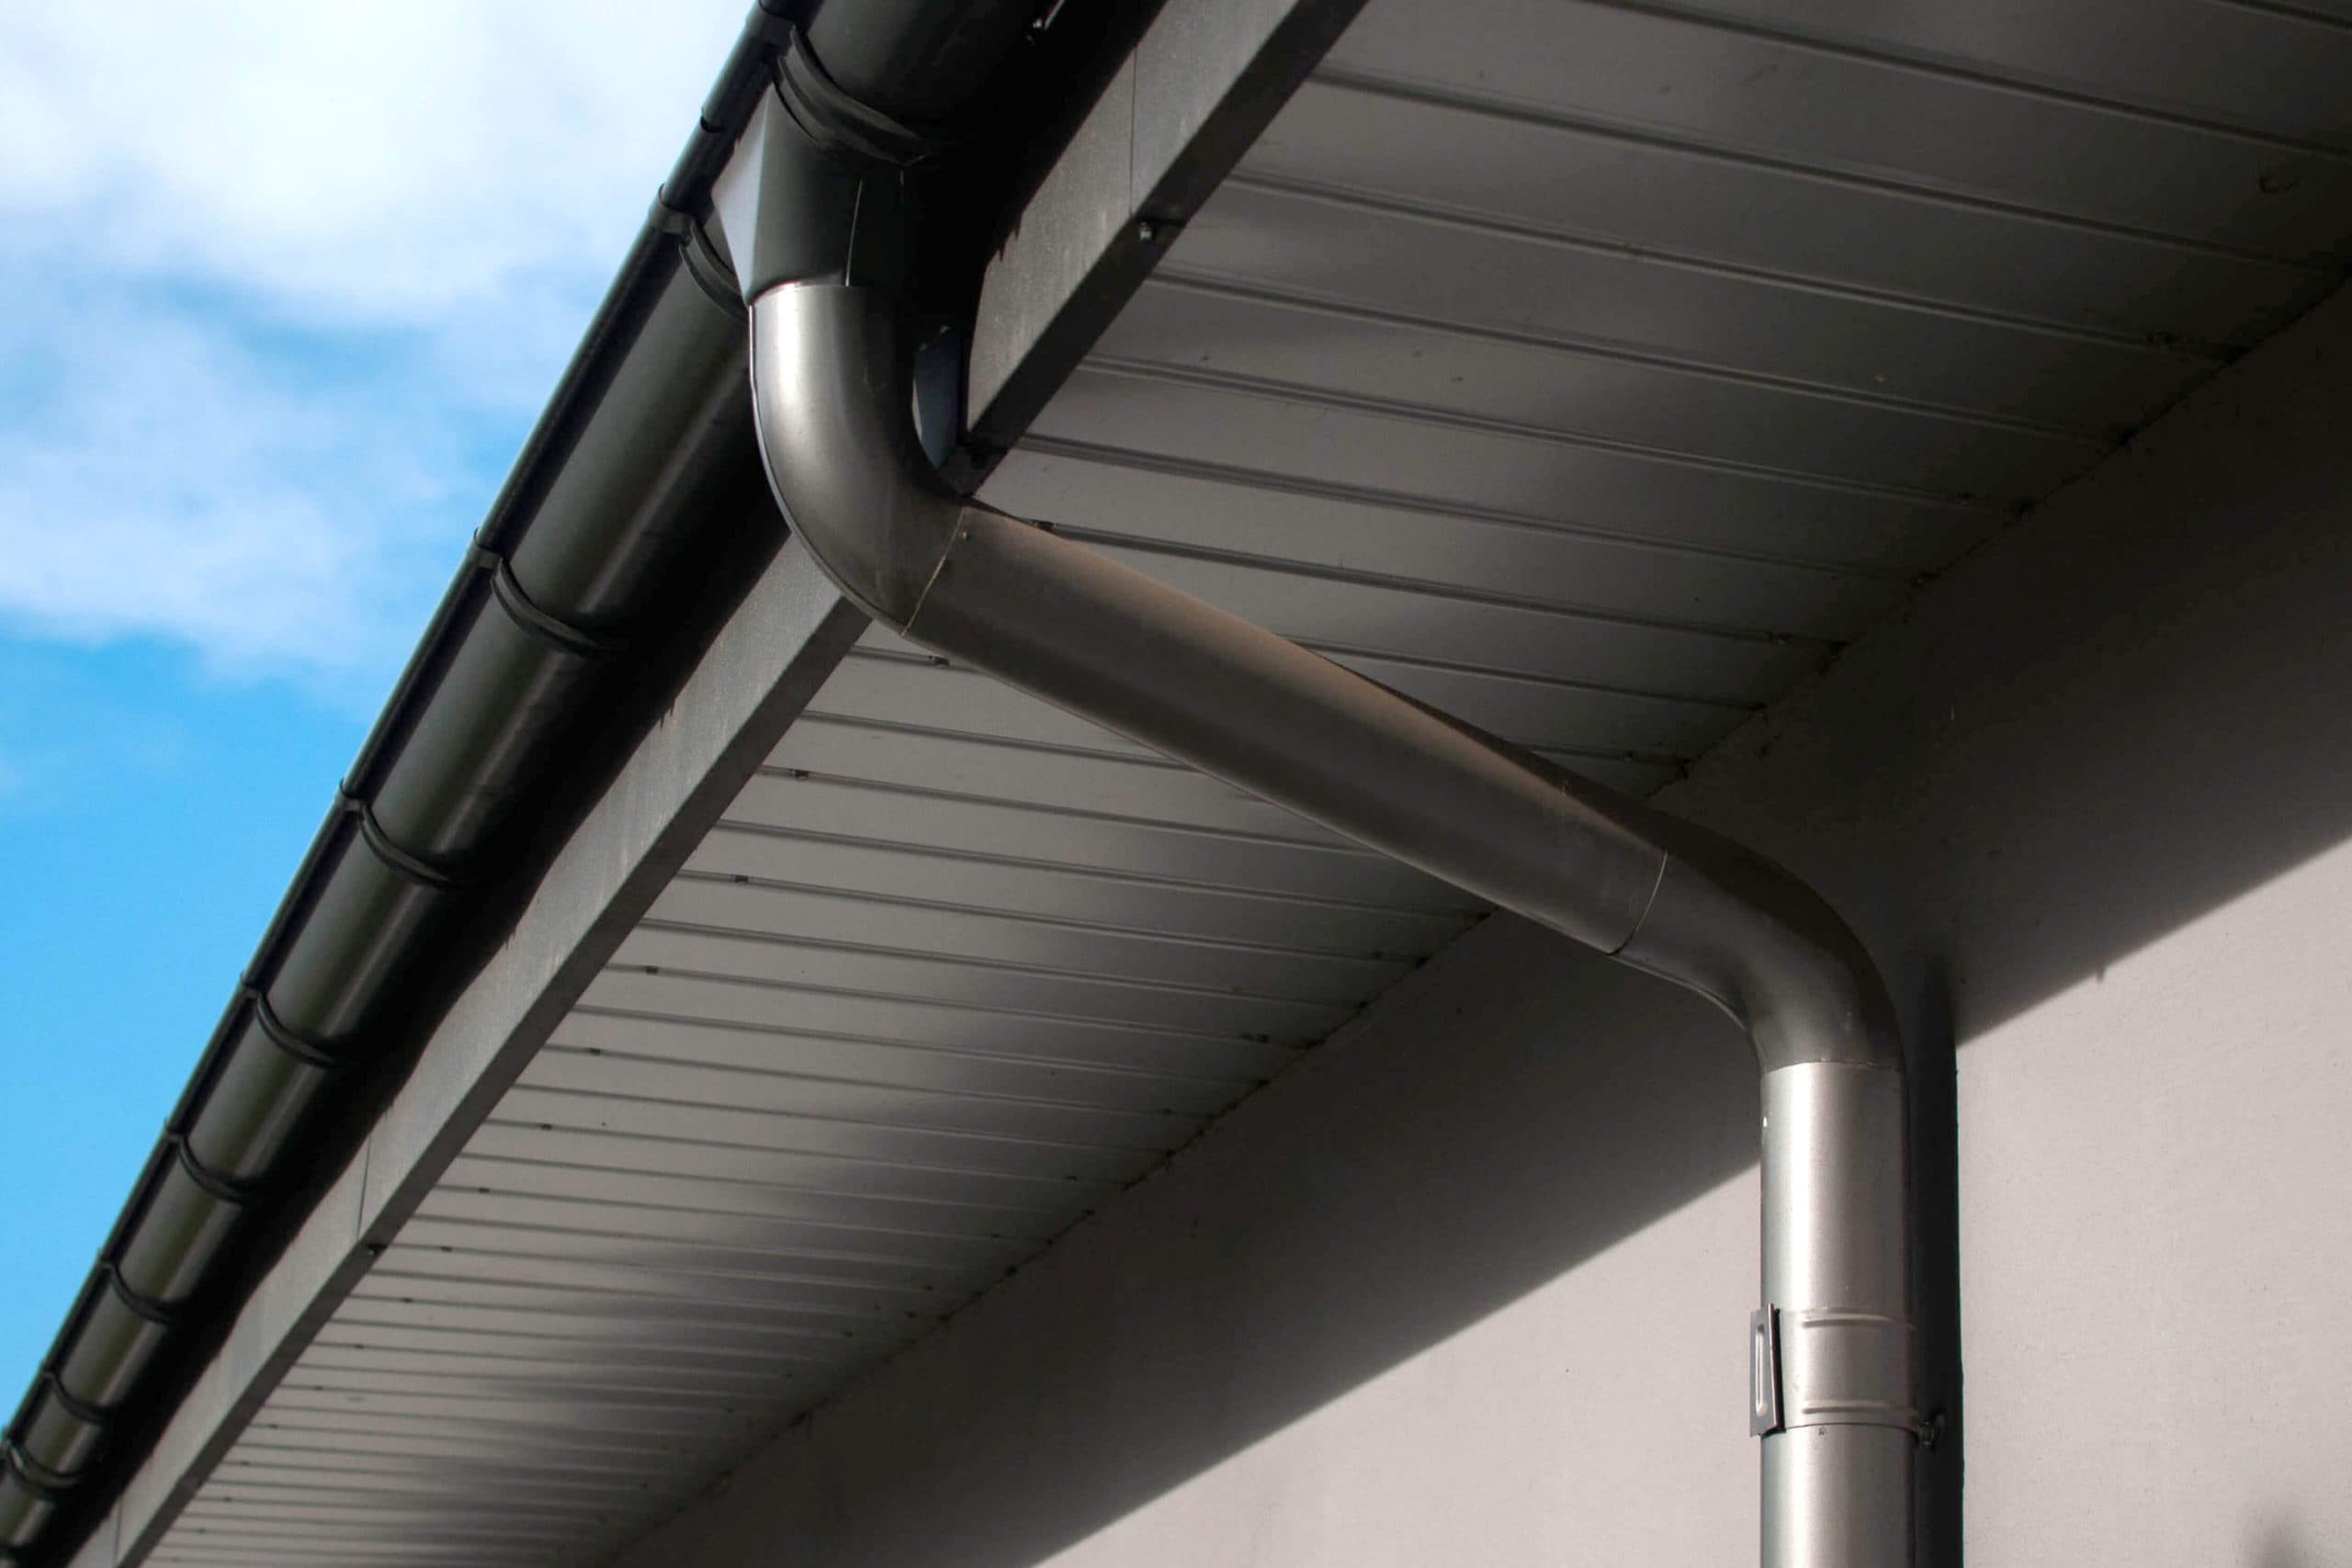 Reliable and affordable Galvanized gutters installation in Colorado Springs